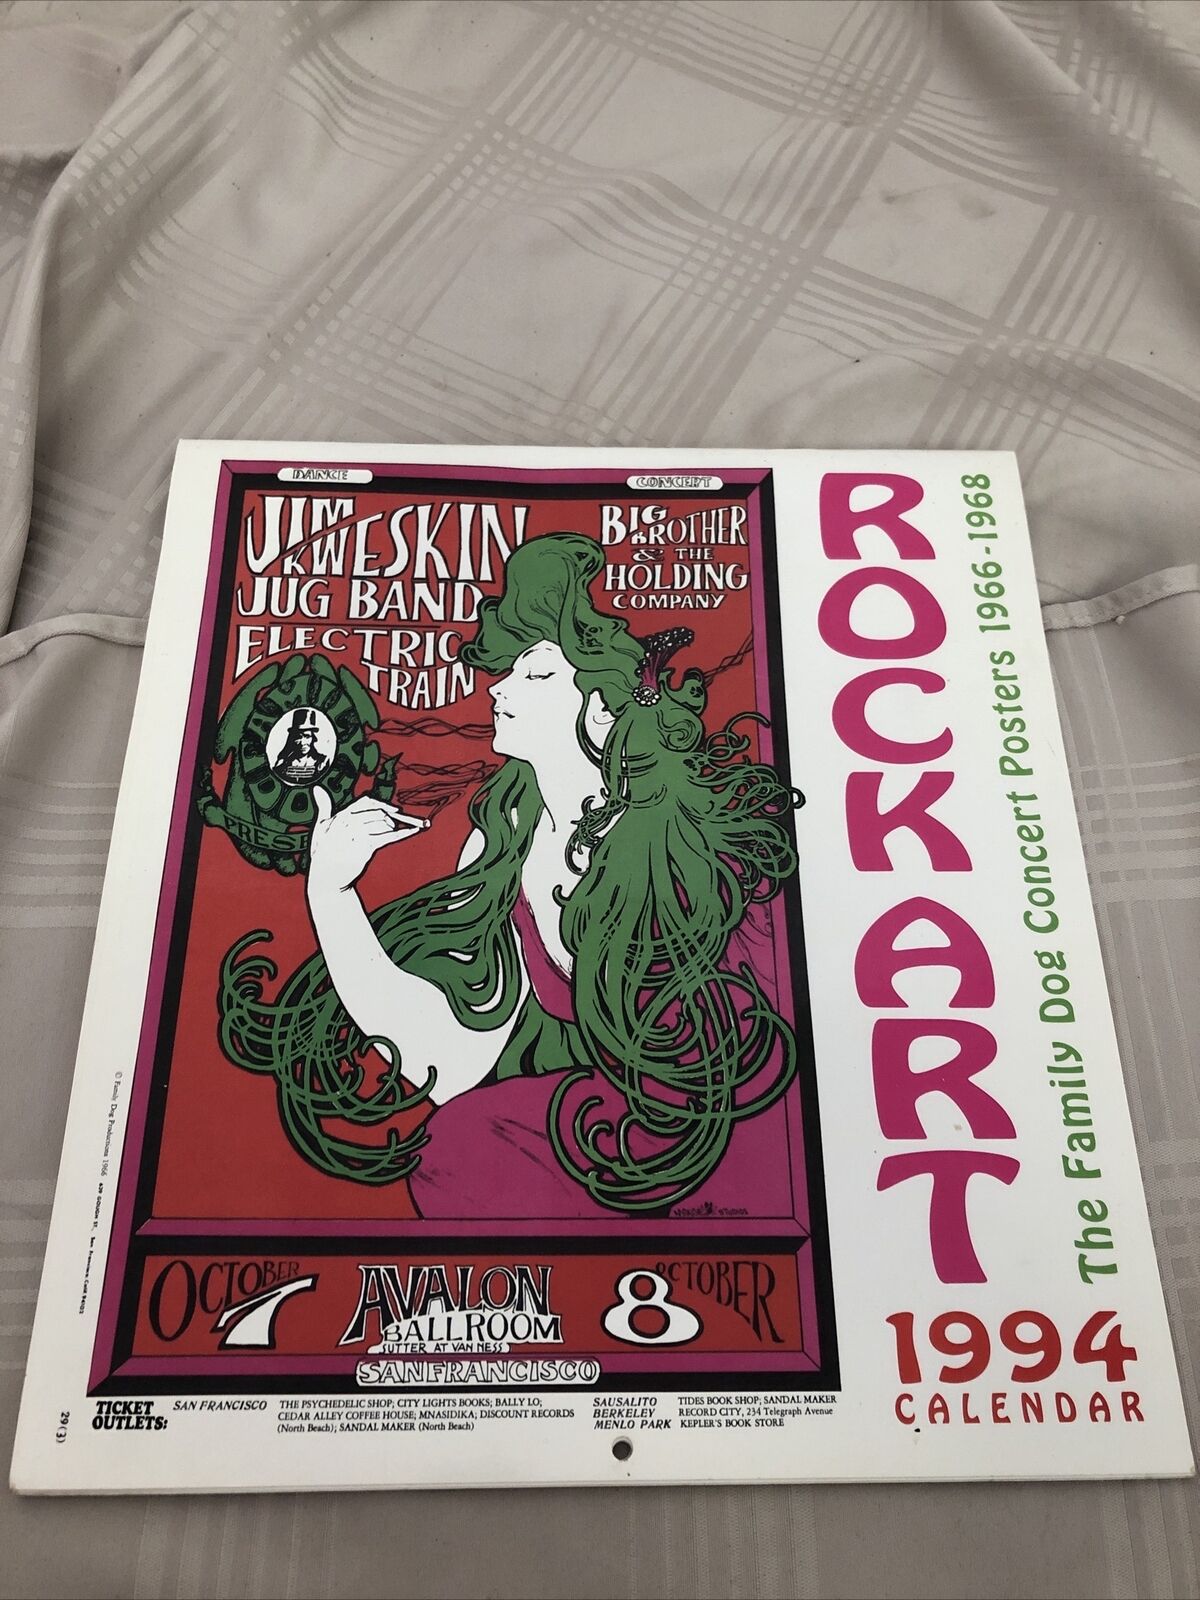 Family Dog Productions 1966 Rock art Calendar 1994 Unmarked Collectible Vintage